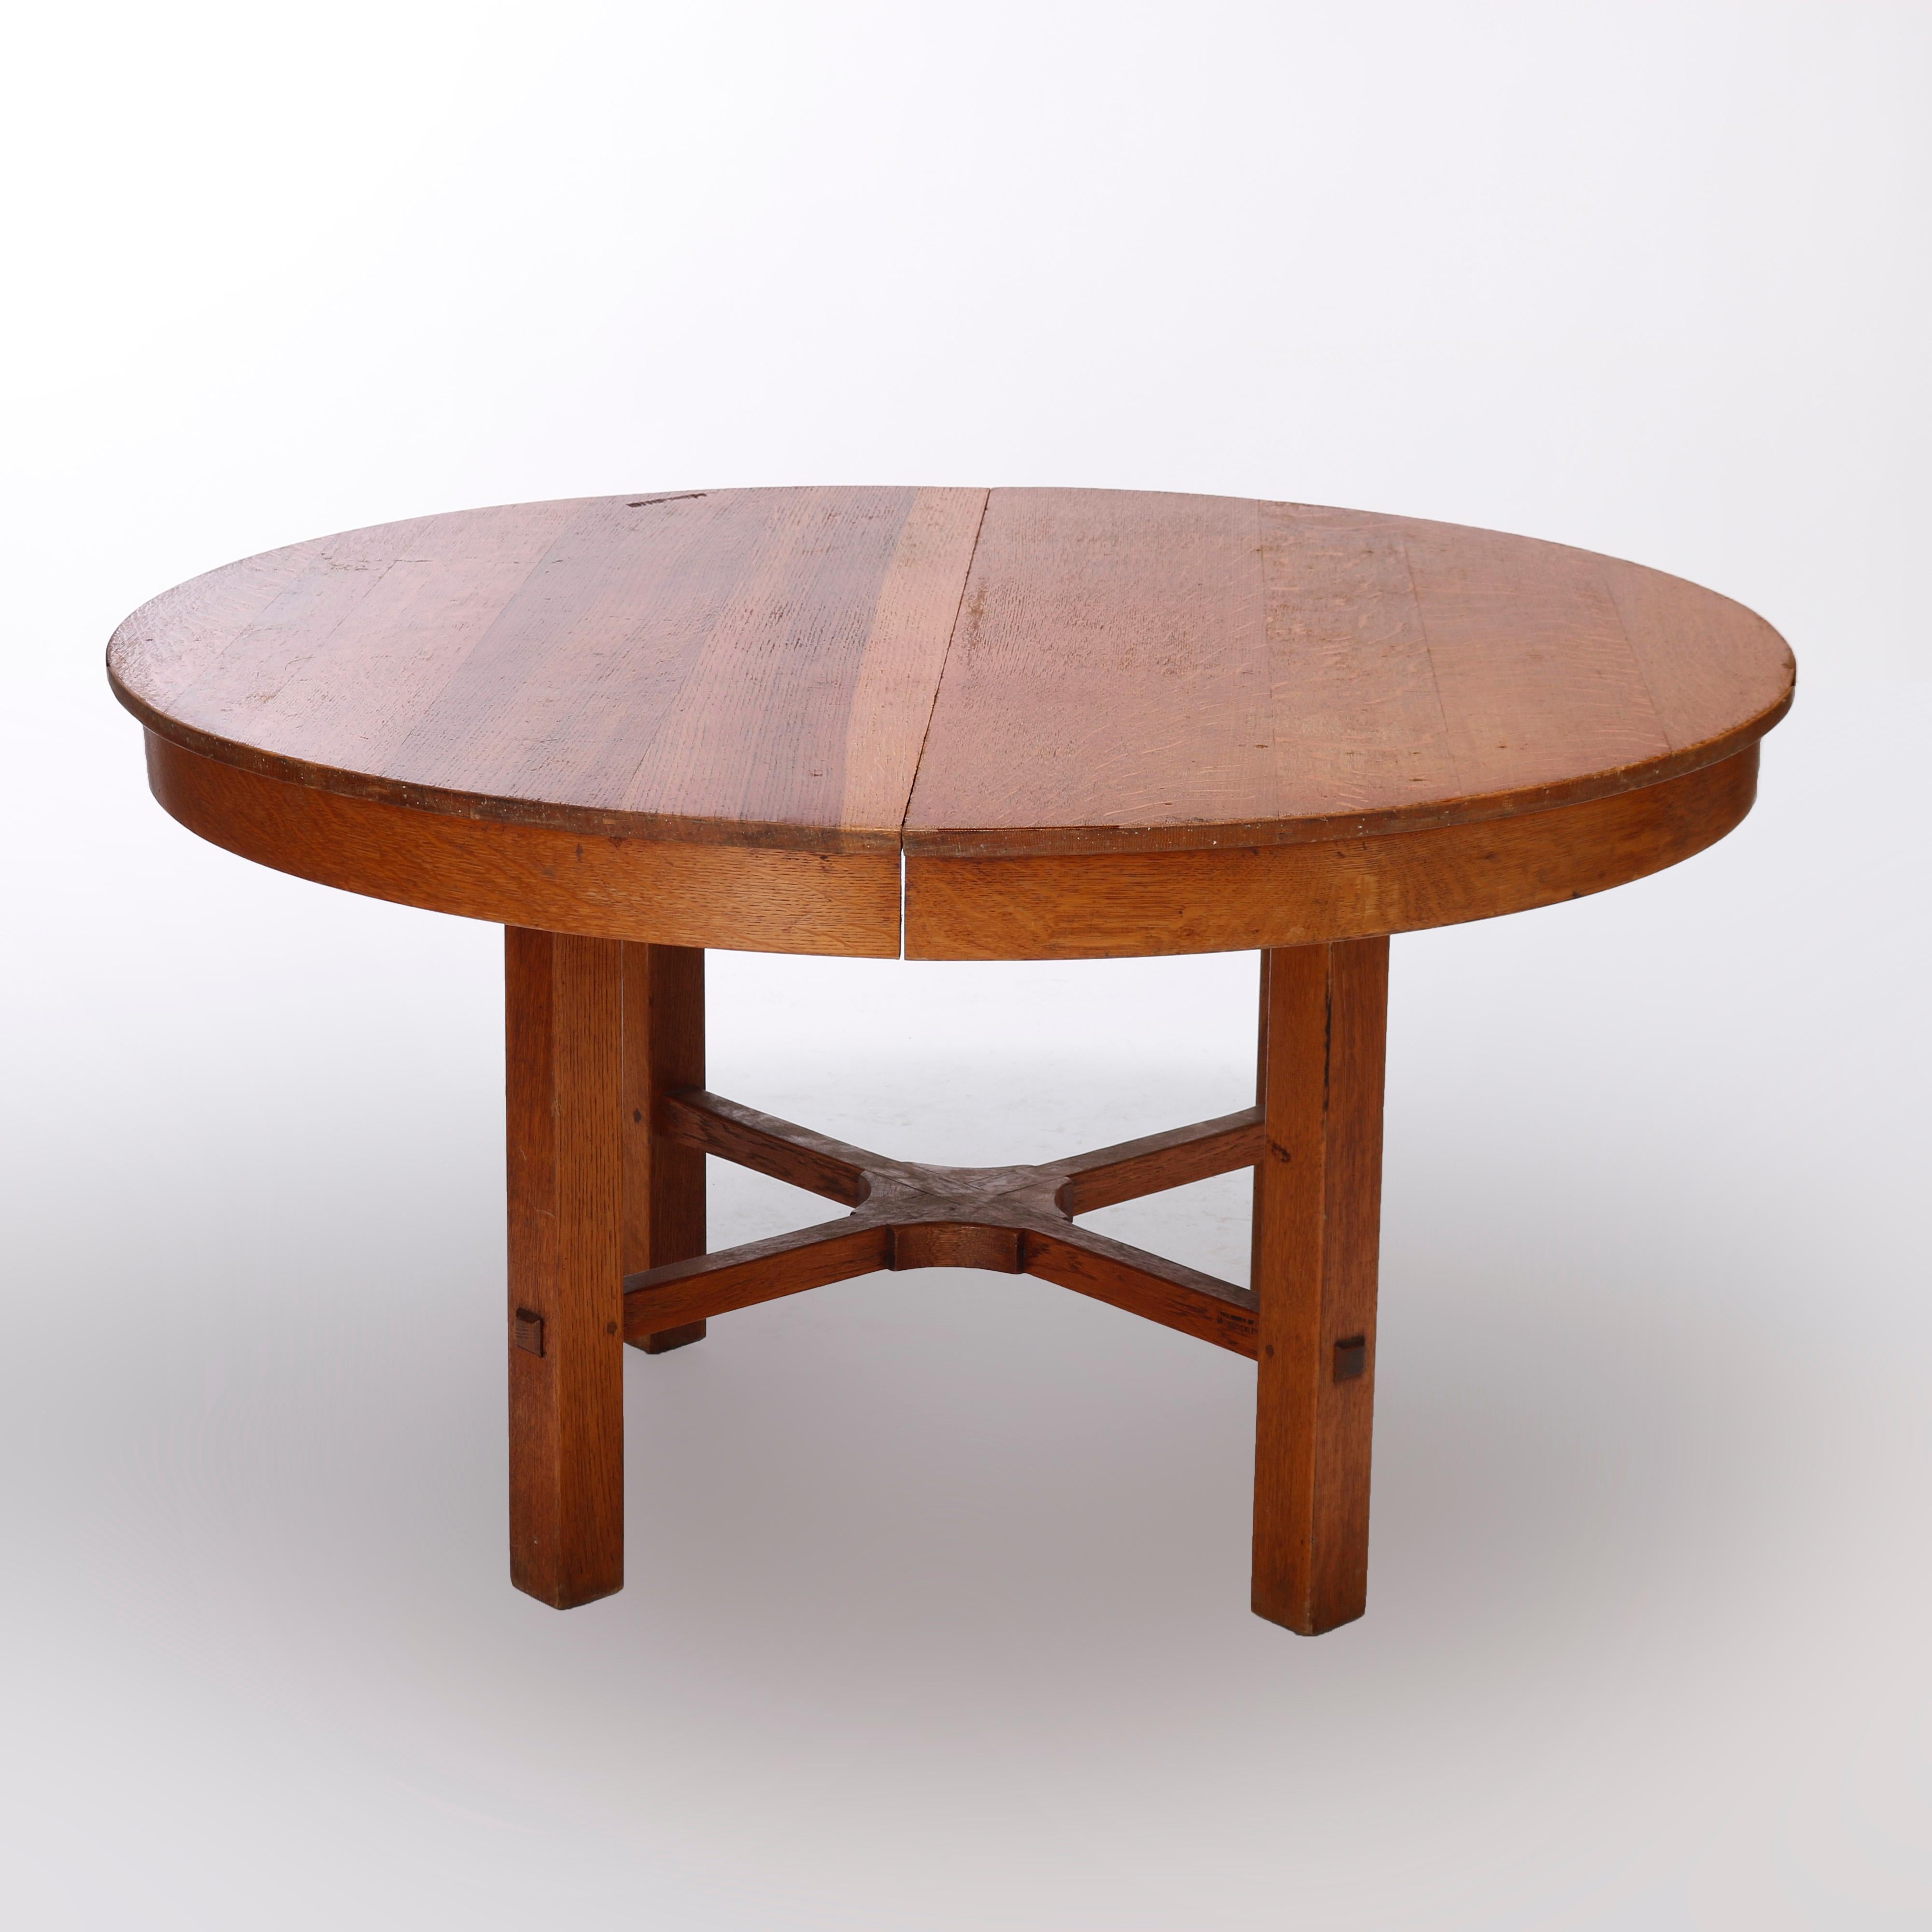 American Arts & Crafts Extension Oak Dining Table, Work of L&JG Stickley, c1950